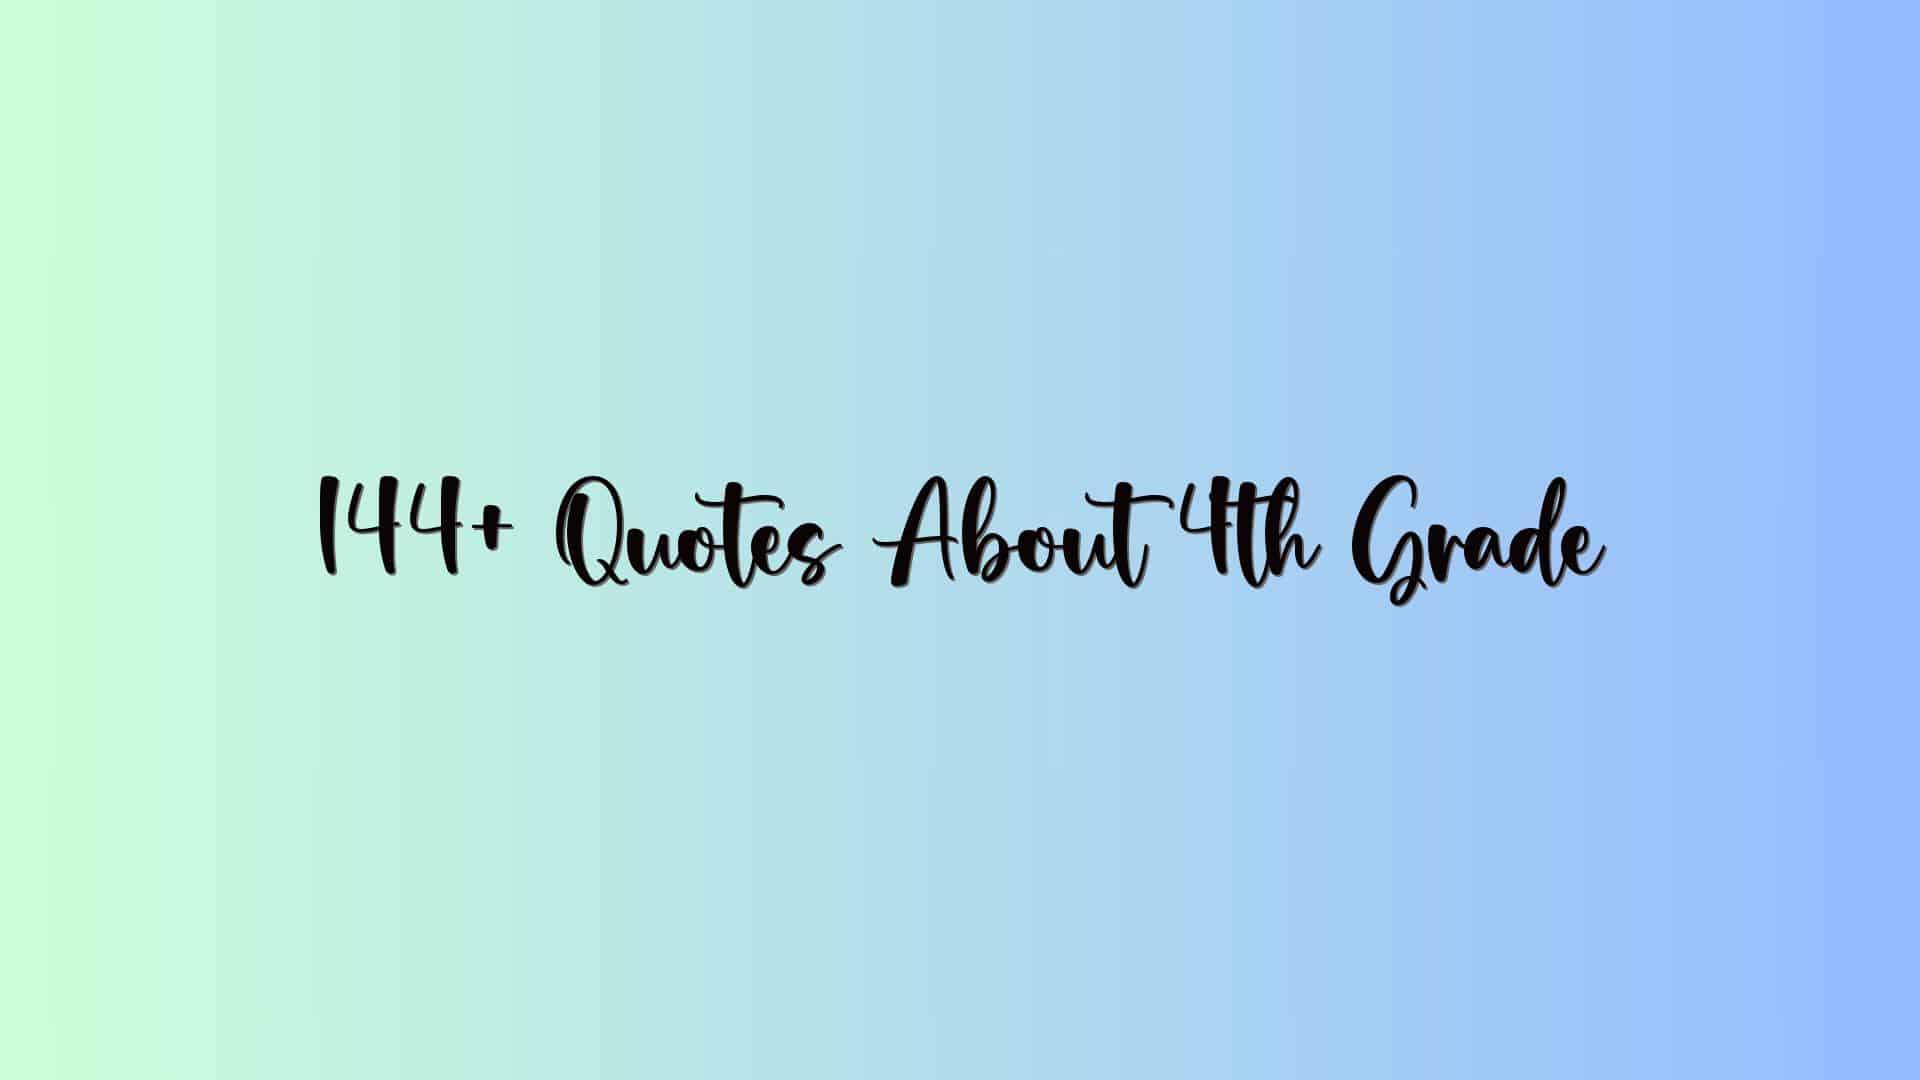 144+ Quotes About 4th Grade